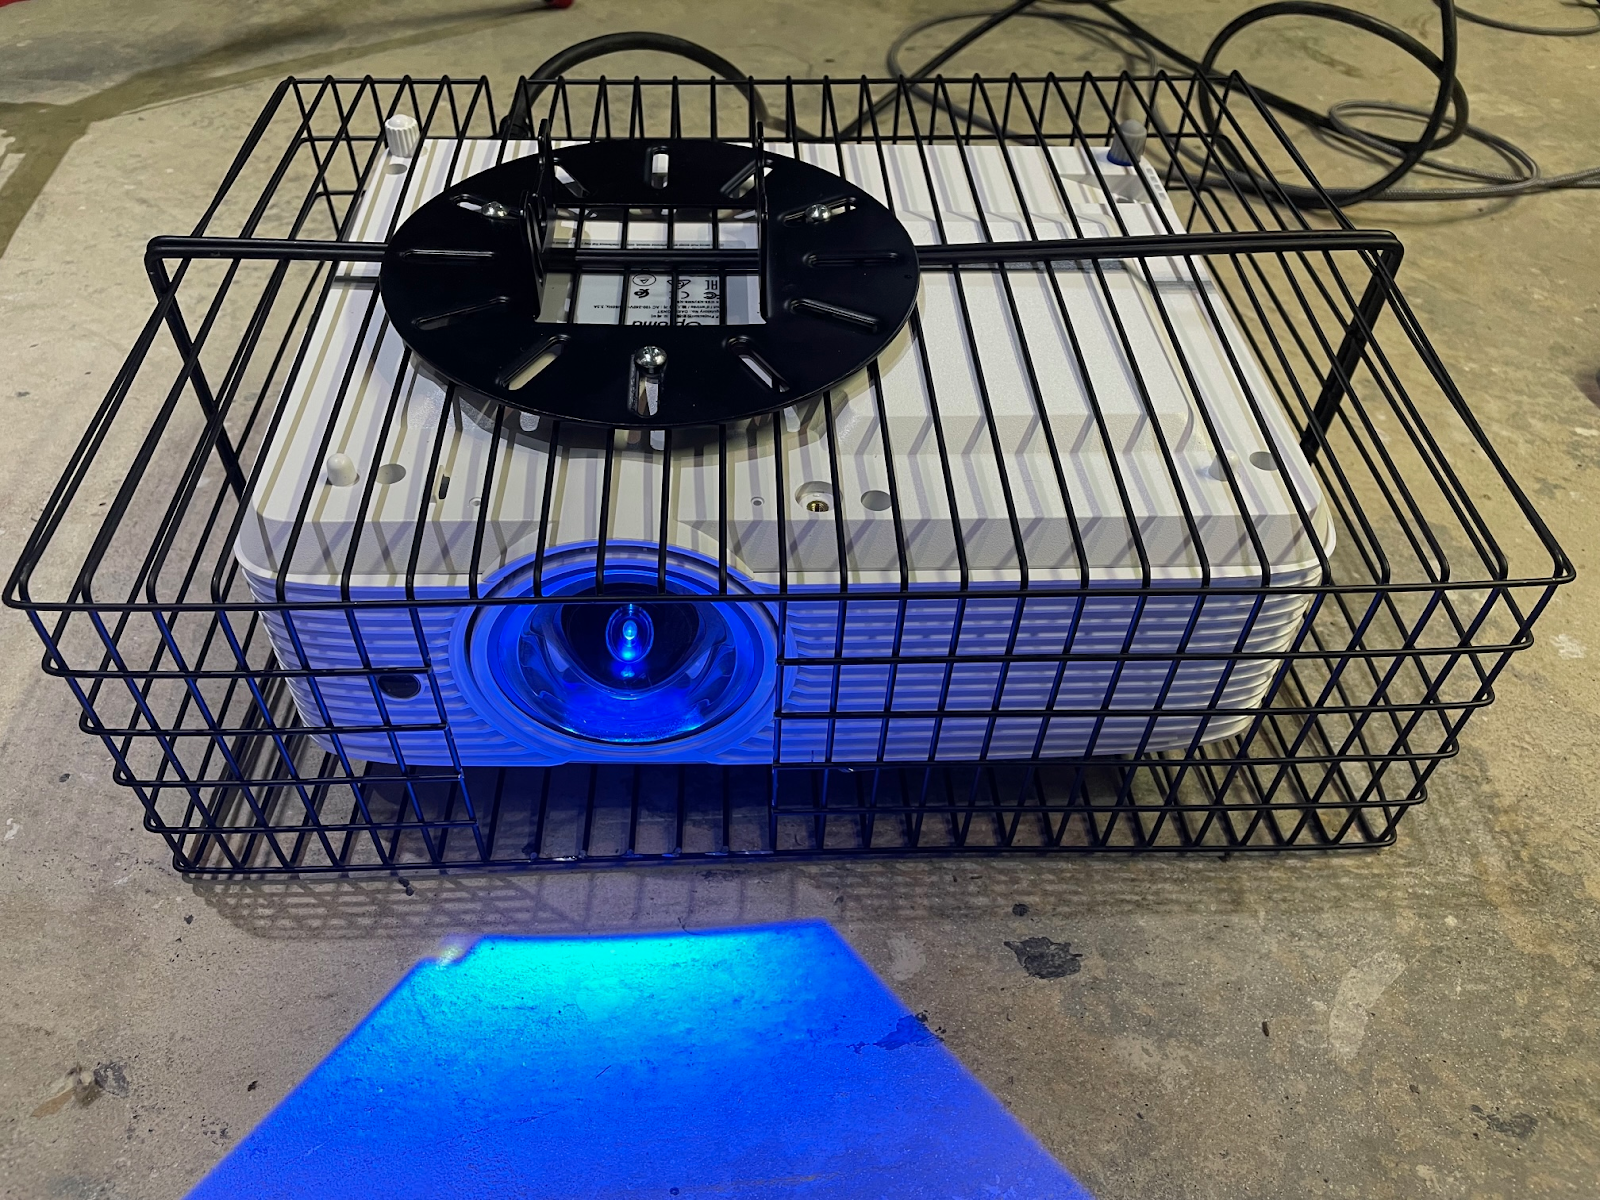 Projector with homemade cage